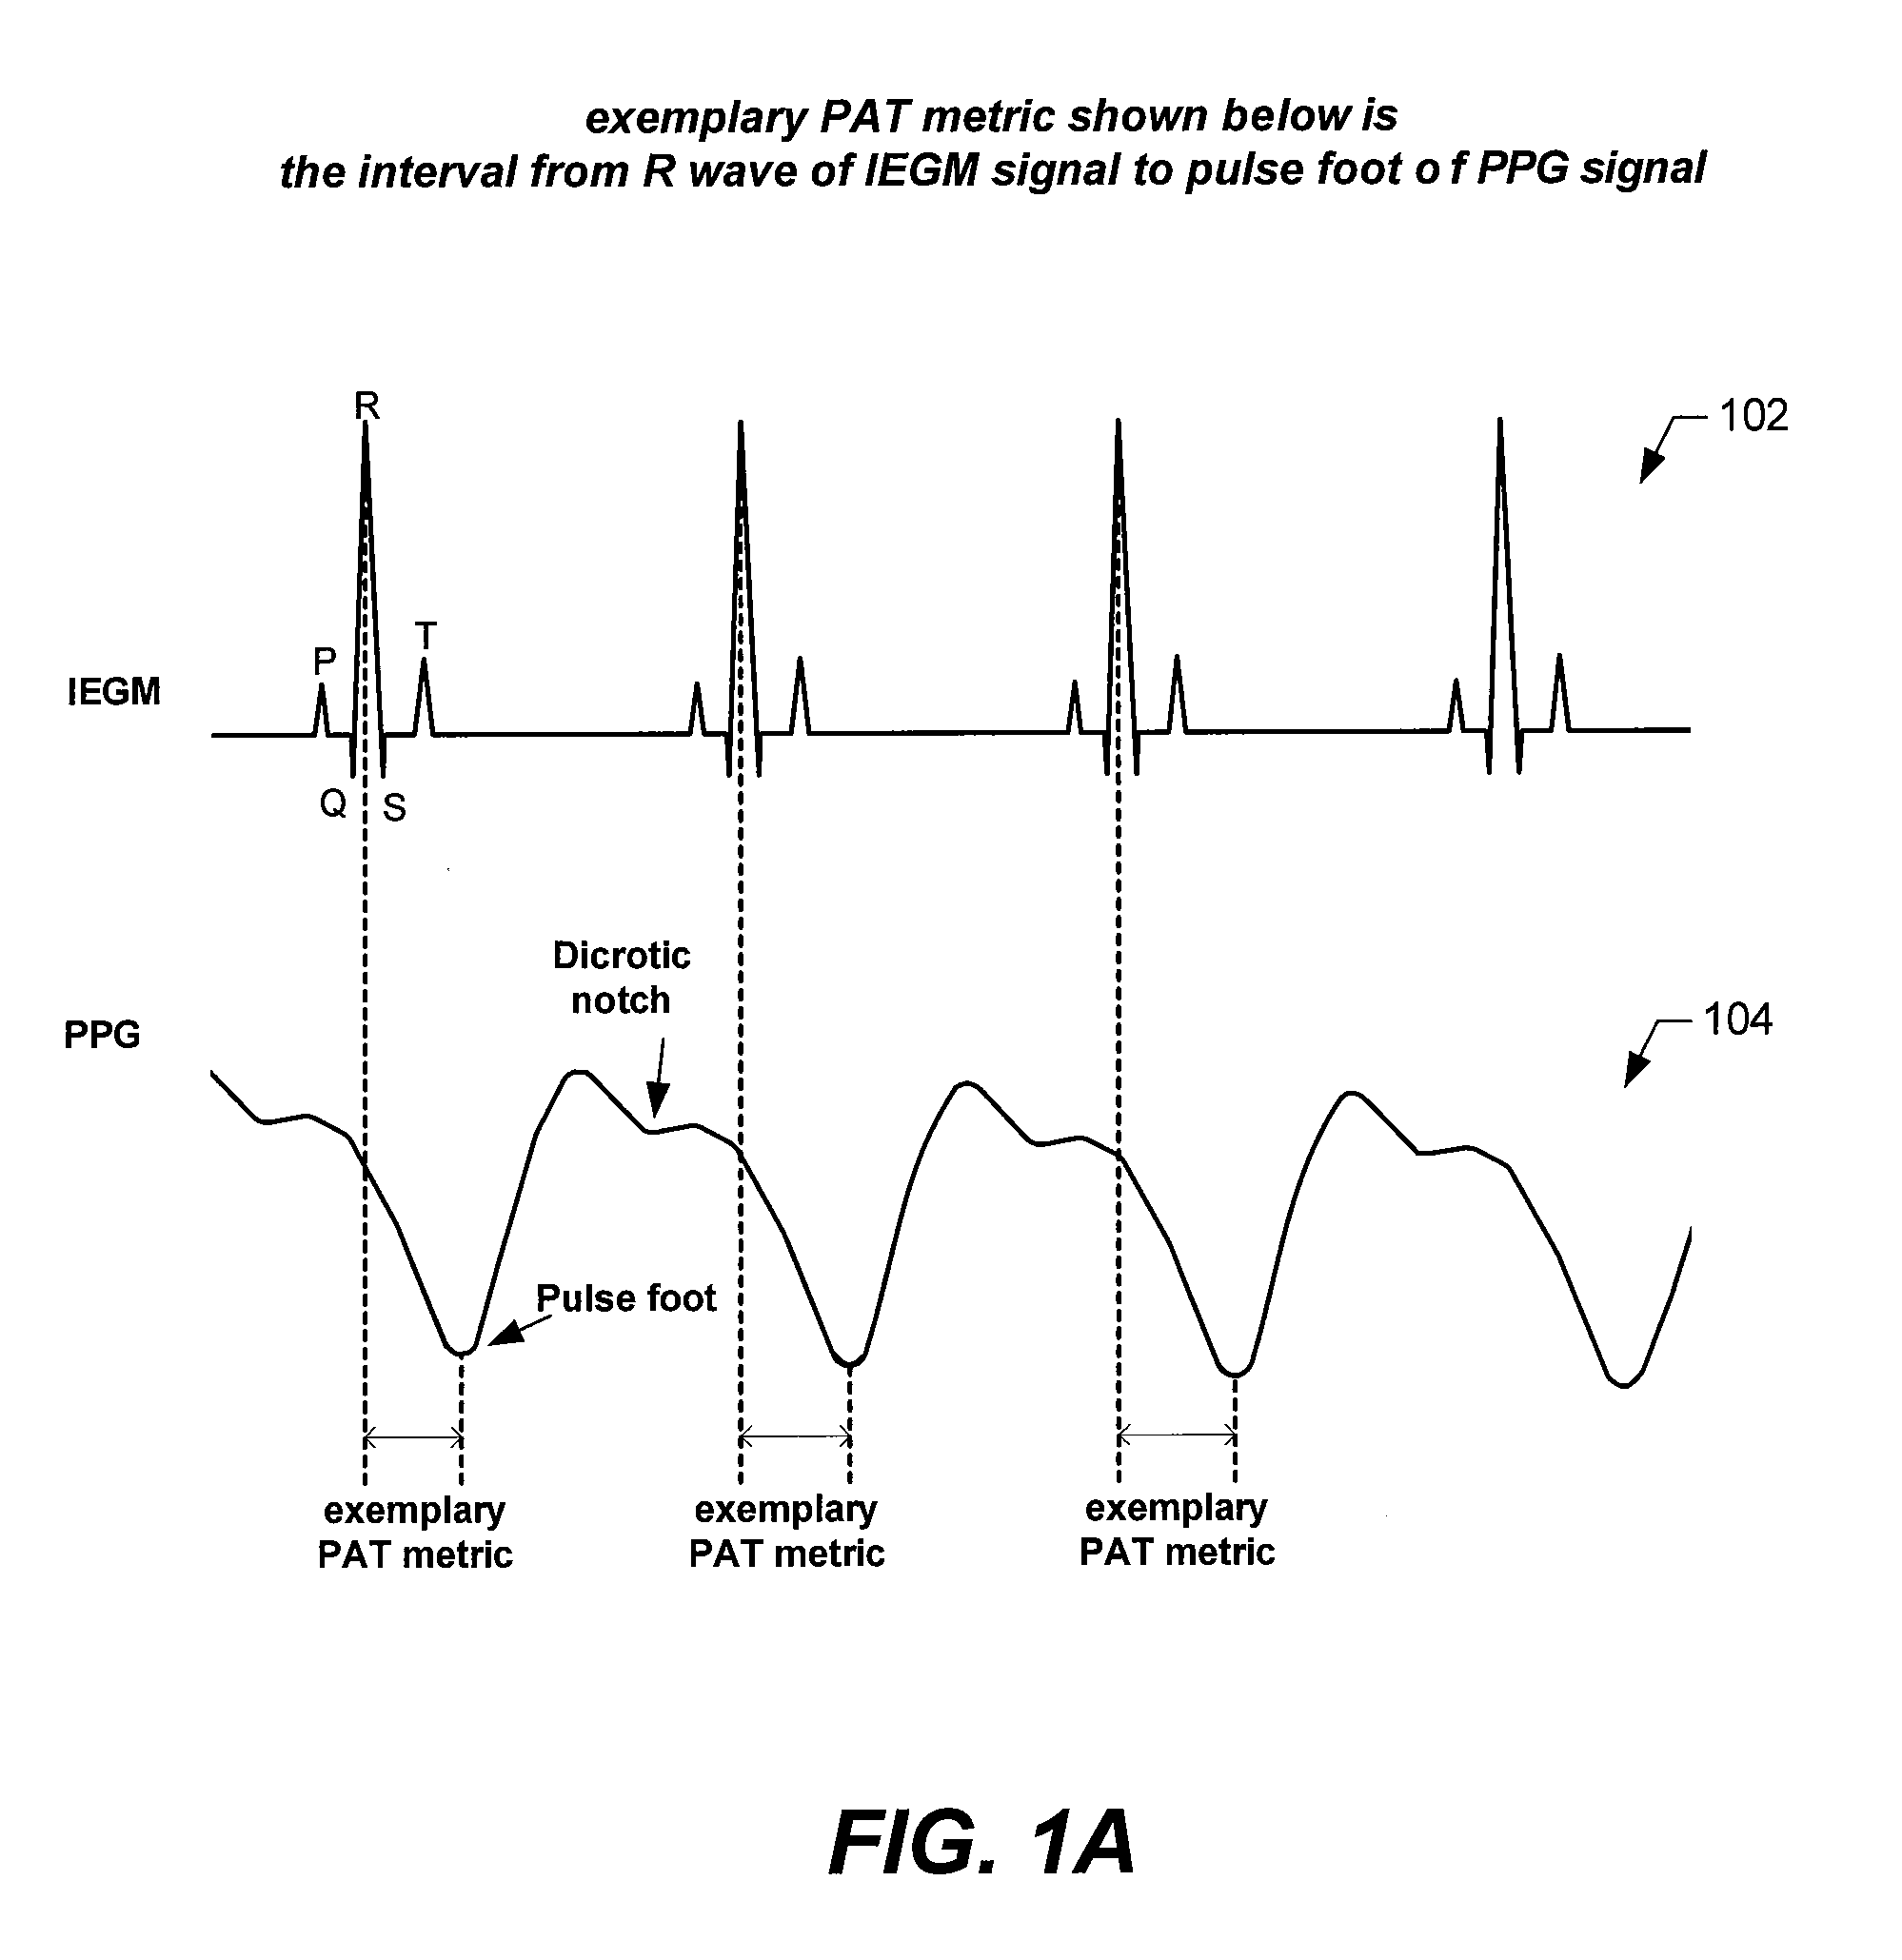 Implantable systems and methods for use therewith for monitoring and modifying arterial blood pressure without requiring an intravascular pressure transducer